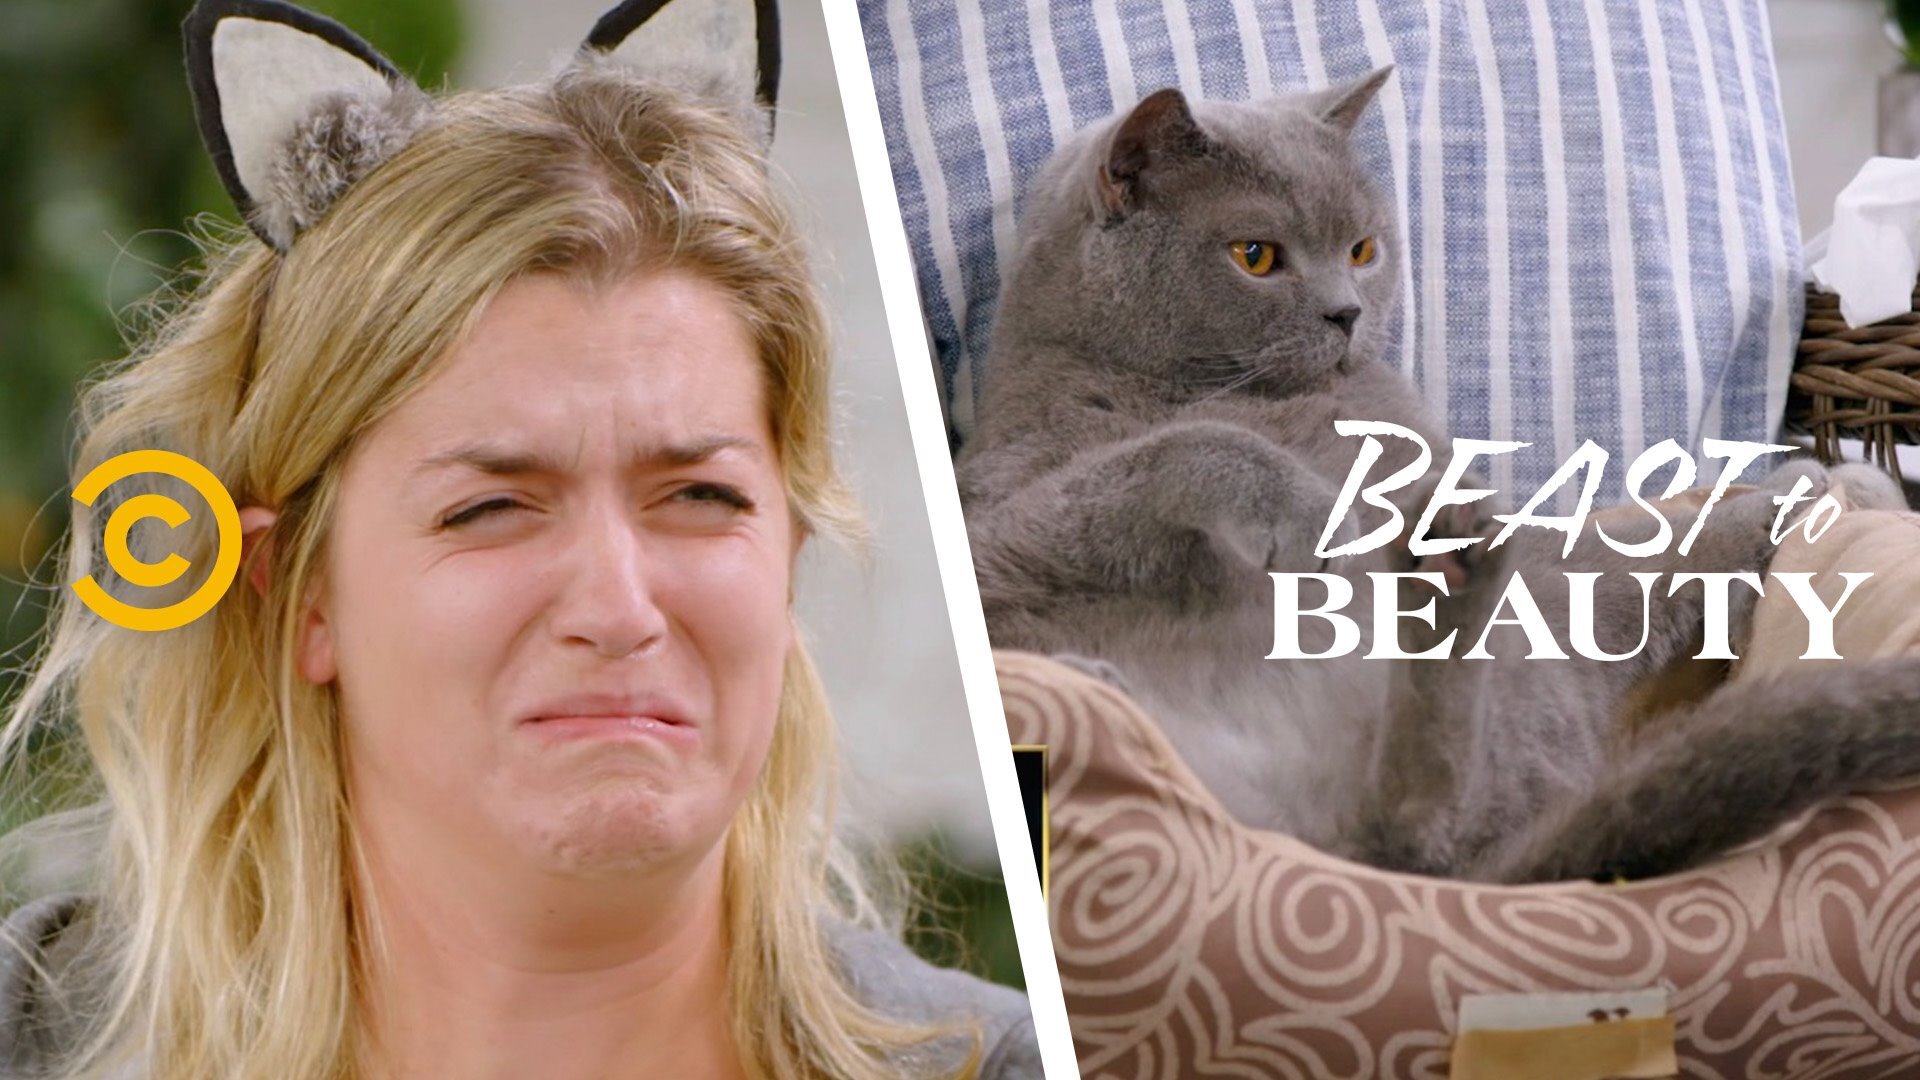 Beast to Beauty: Kitty Don't Clean, Comedy Central, scripted makeover show parody, 2019